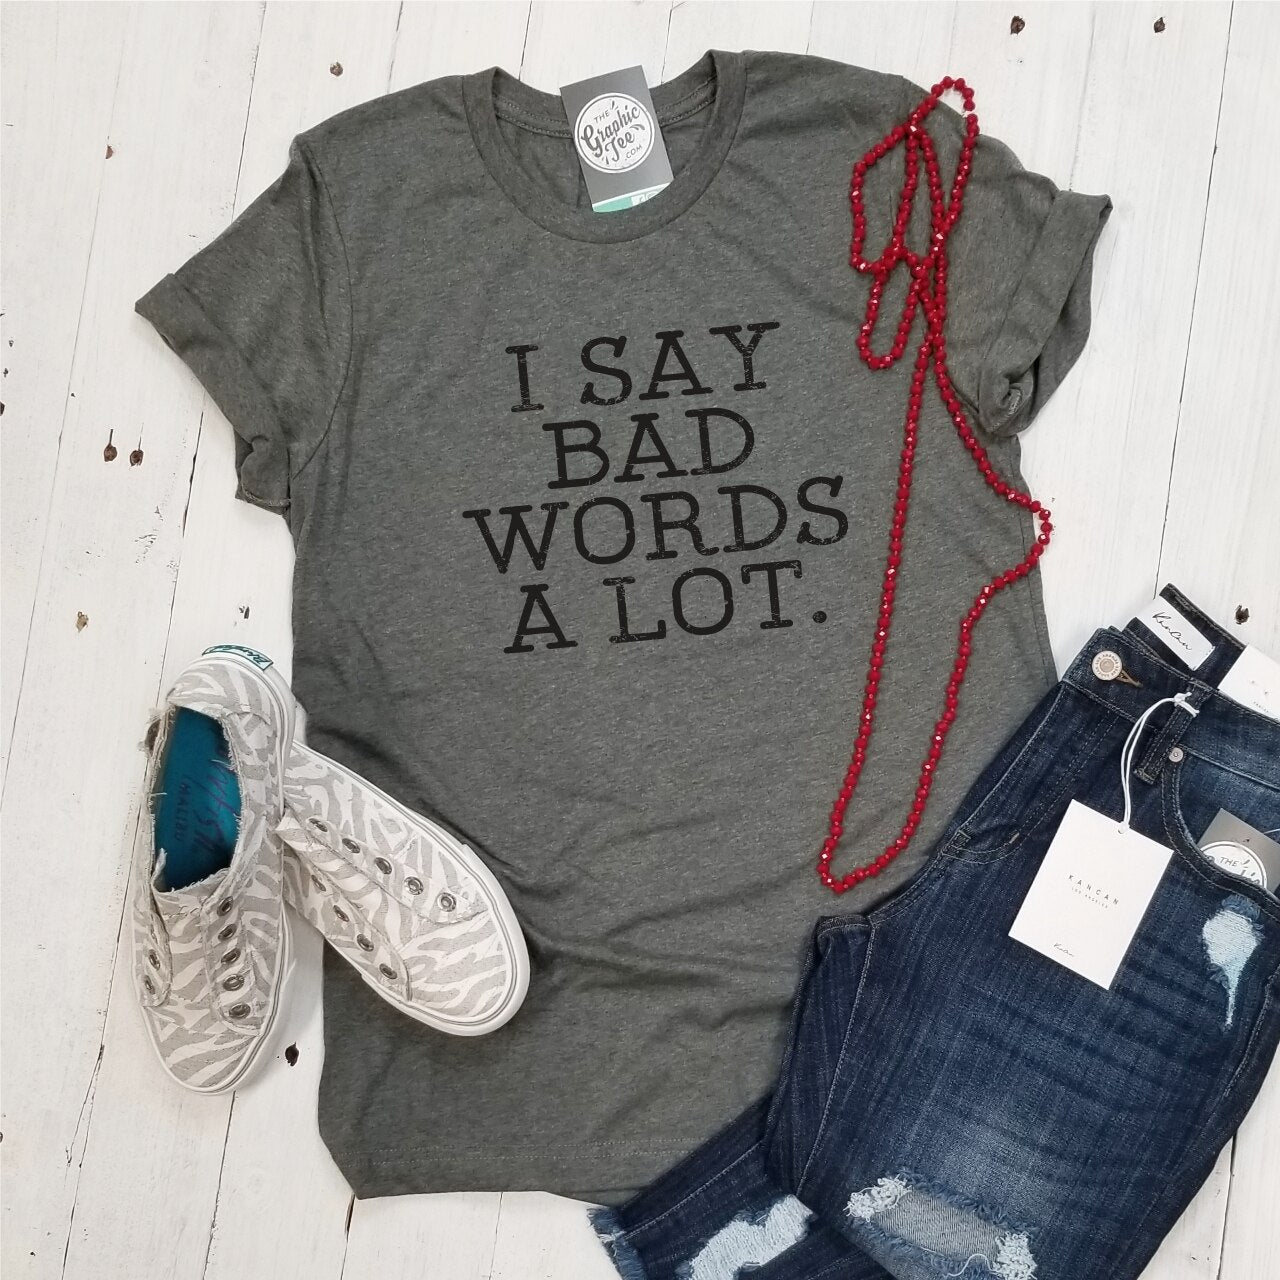 *WHOLESALE* I Say Bad Words A Lot. - Unisex Tee - The Graphic Tee